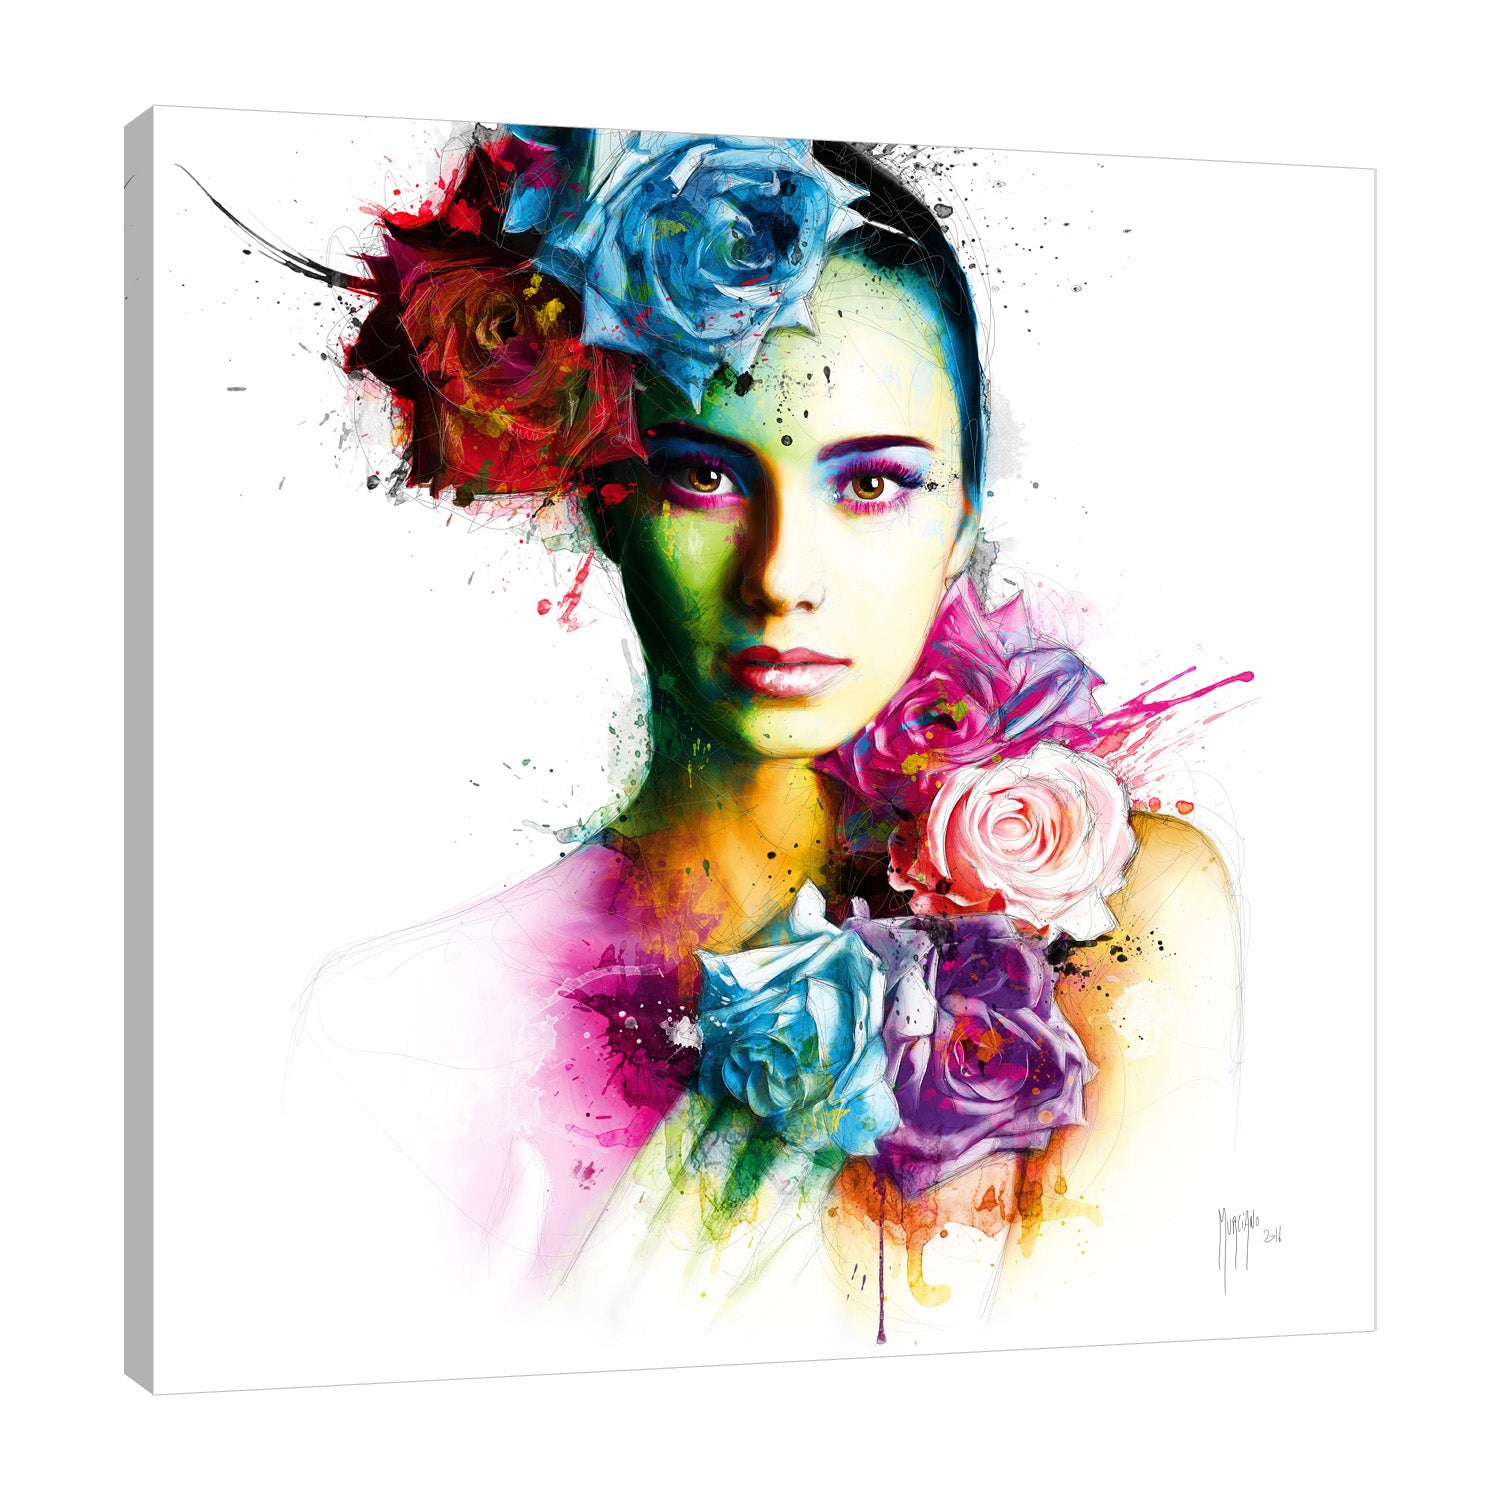 Patrice-Murciano,Modern & Contemporary,Floral & Botanical,woman,flowers,florals,splatters,Blue,Slate Gray,Red,White